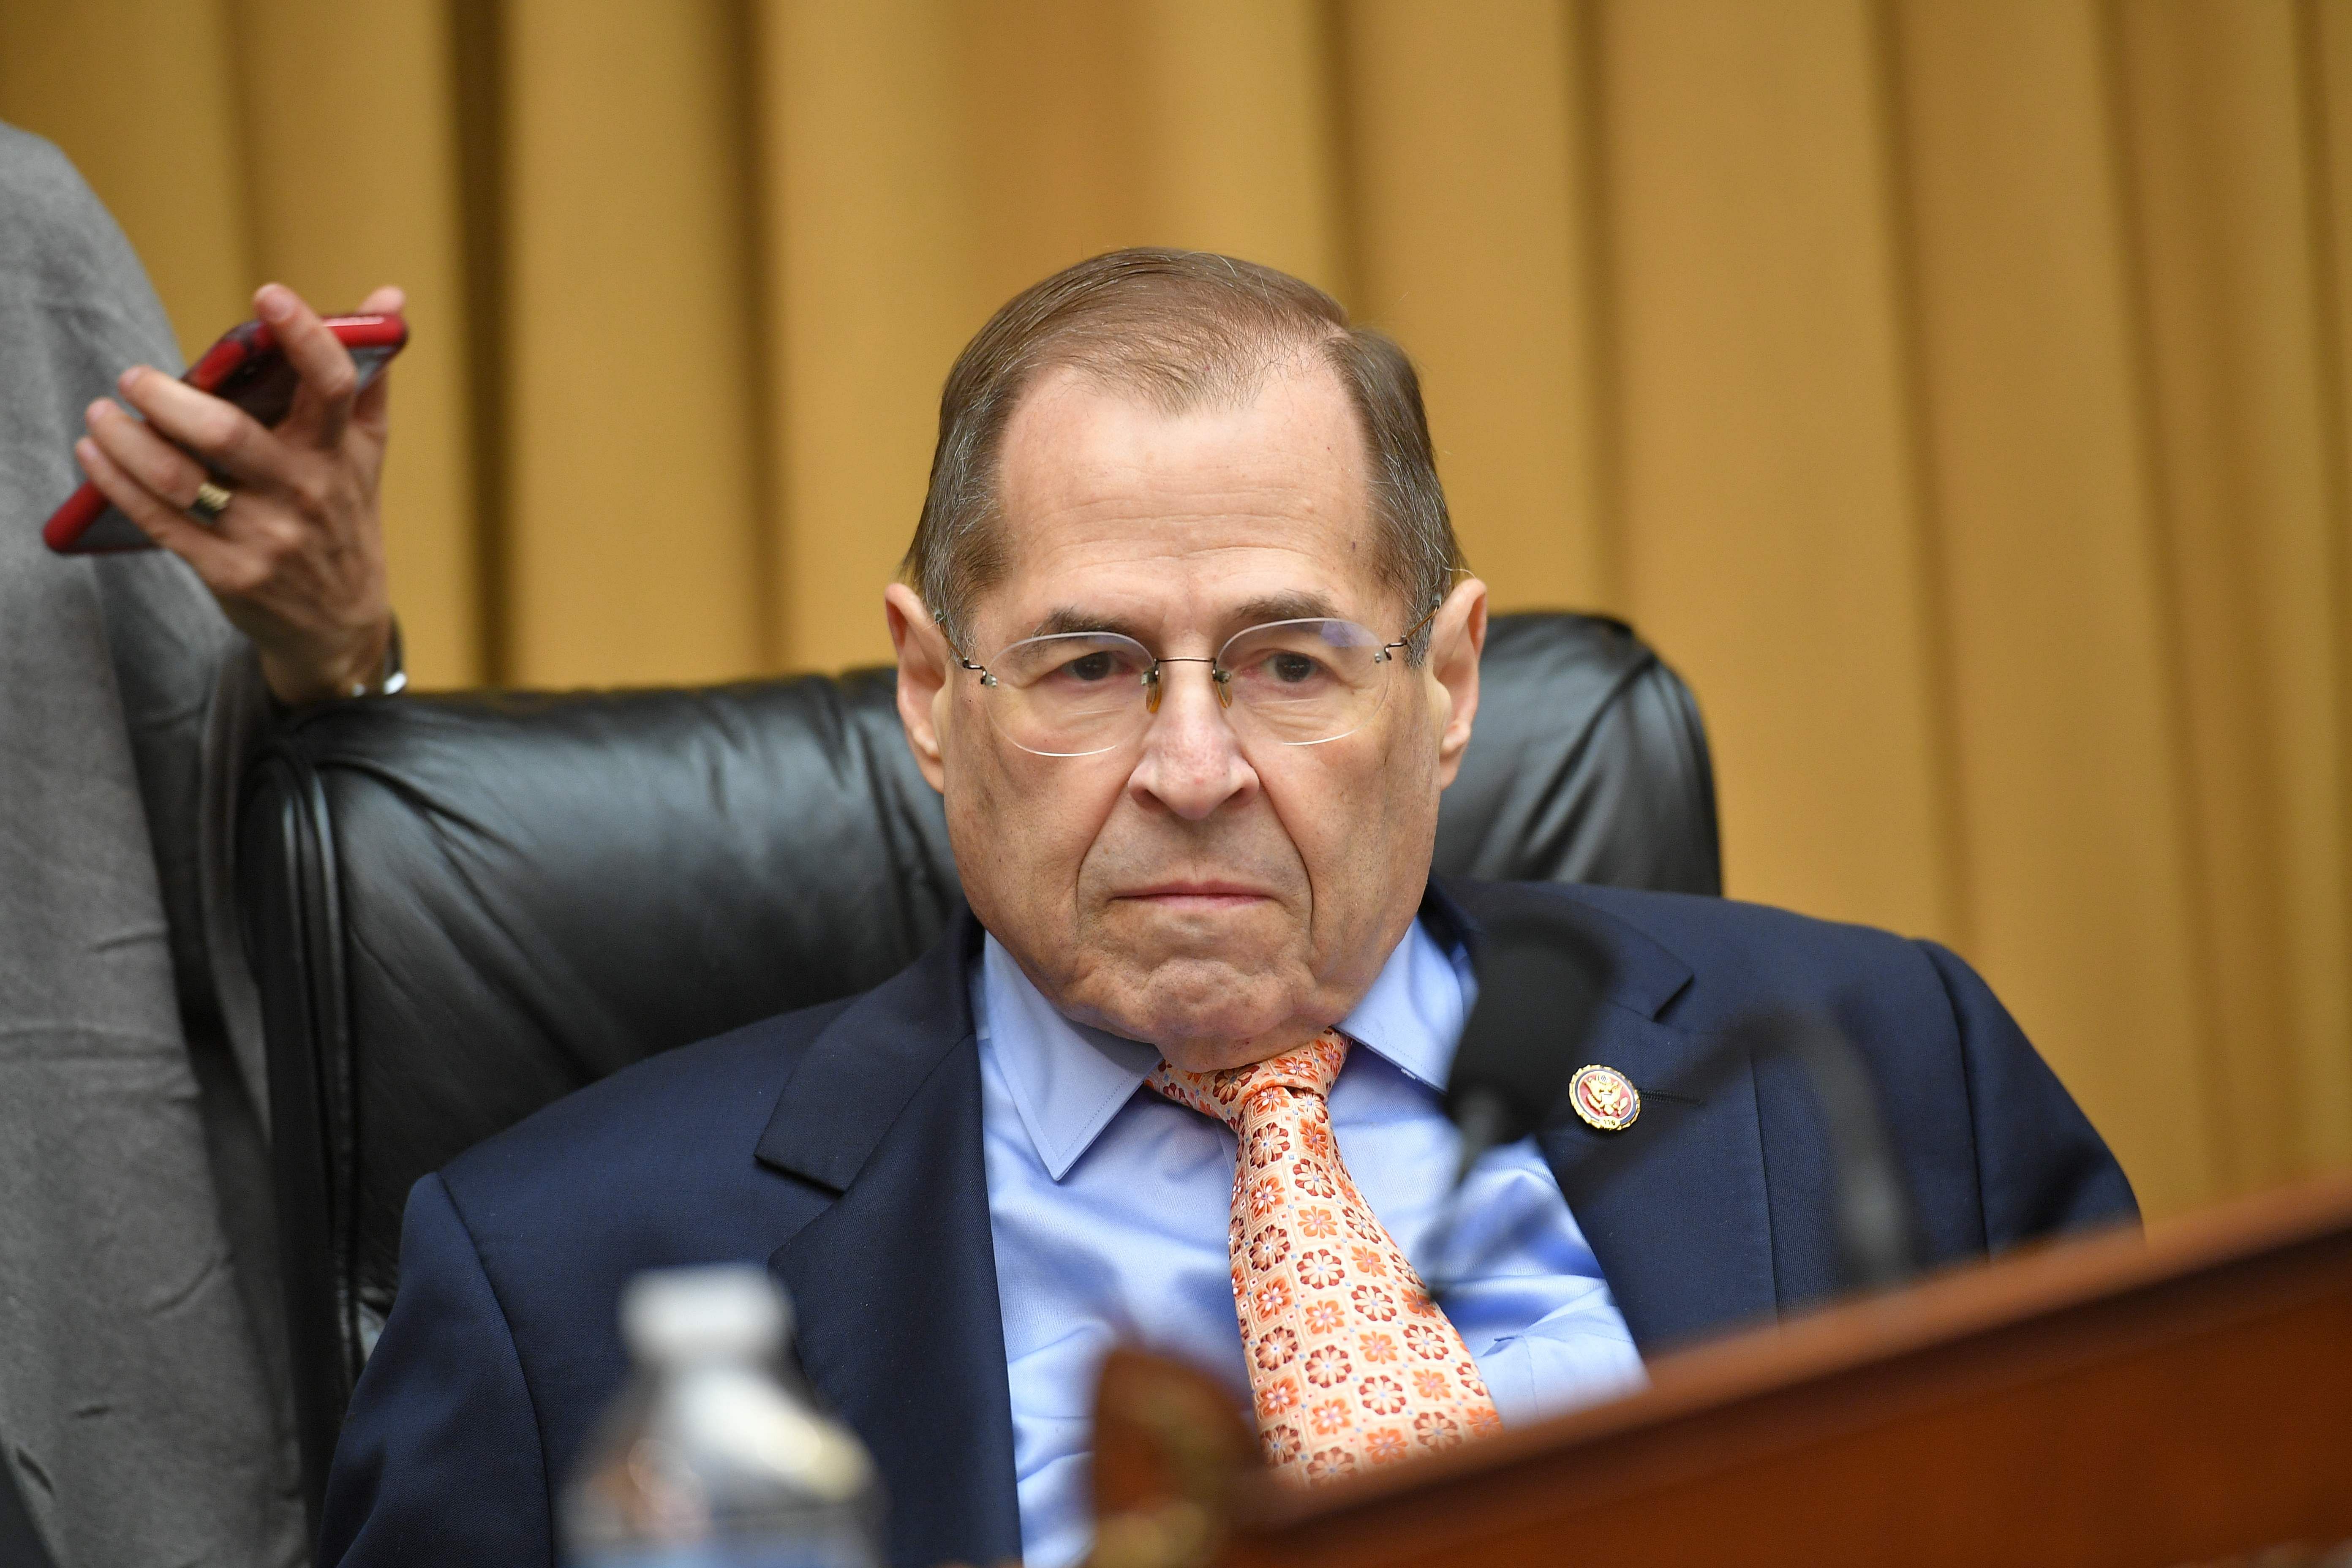 Chairman of the House Judiciary Committee, US Representative Jerry Nadler, waits during a hearing to hear testimony from former White House lawyer Don McGhan on the Mueller report, on Capitol Hill in Washington. (AFP Photo)